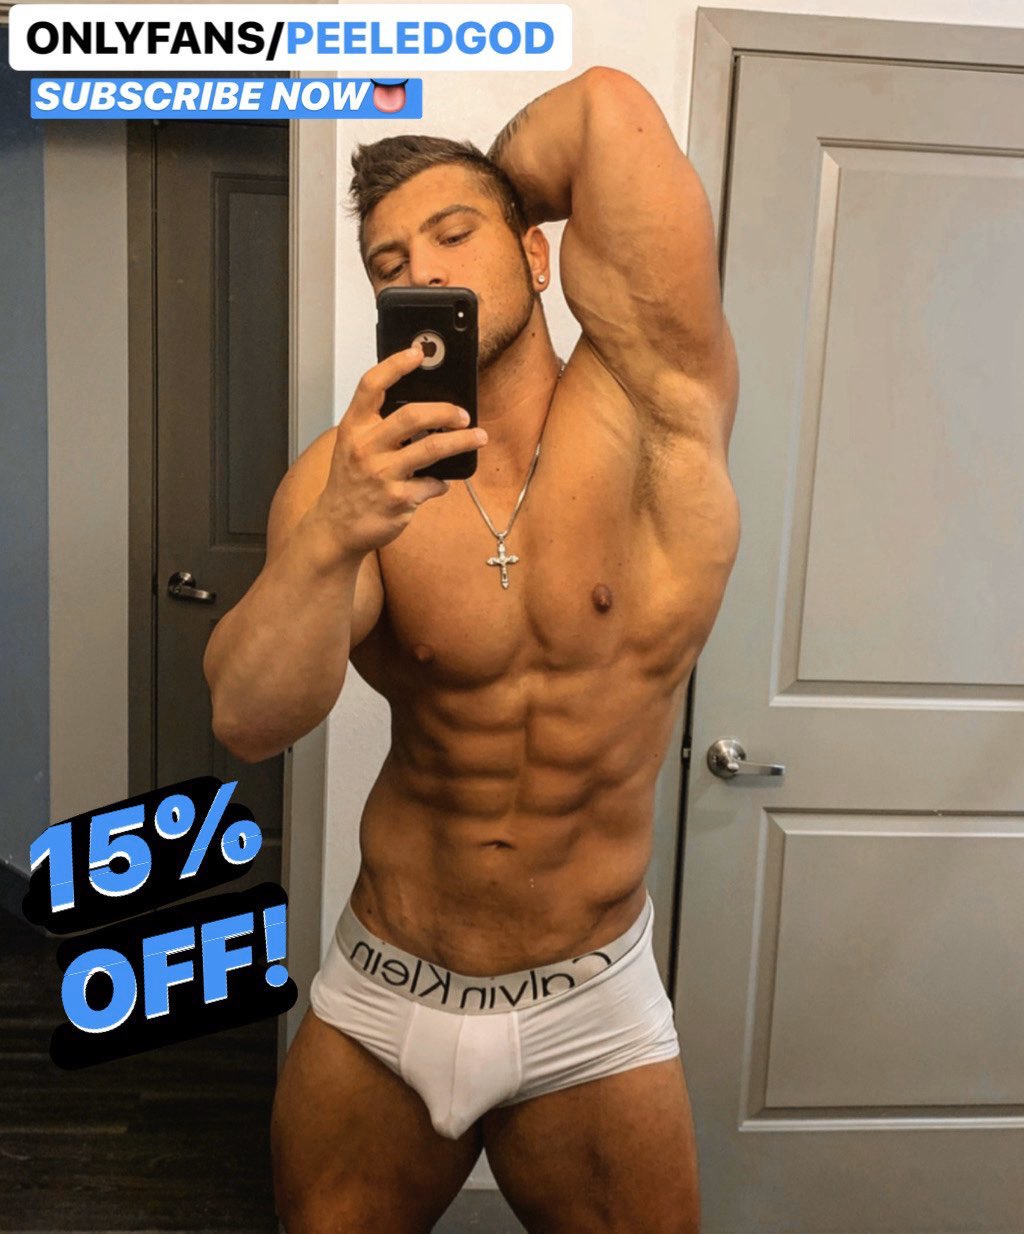 Philly onlyfans